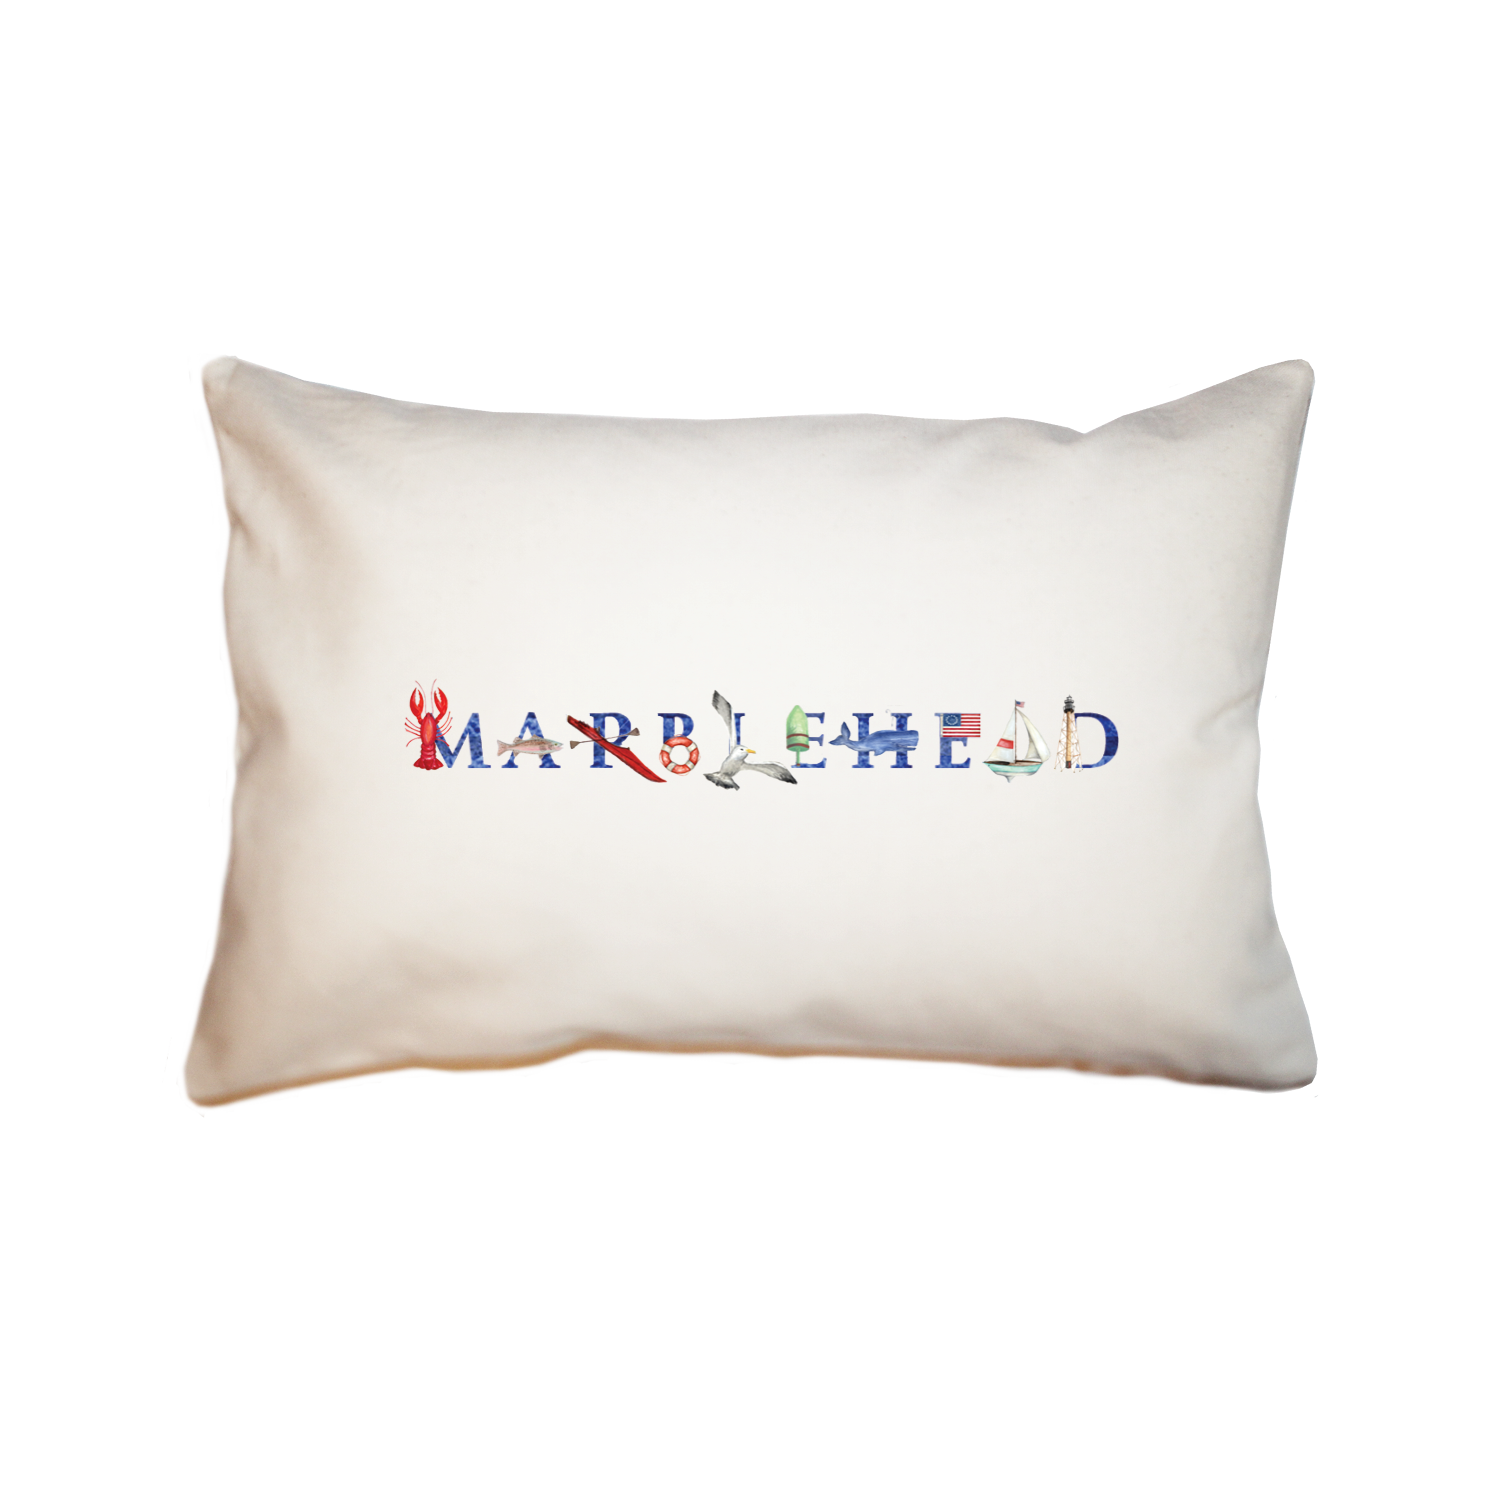 Marblehead large rectangle pillow